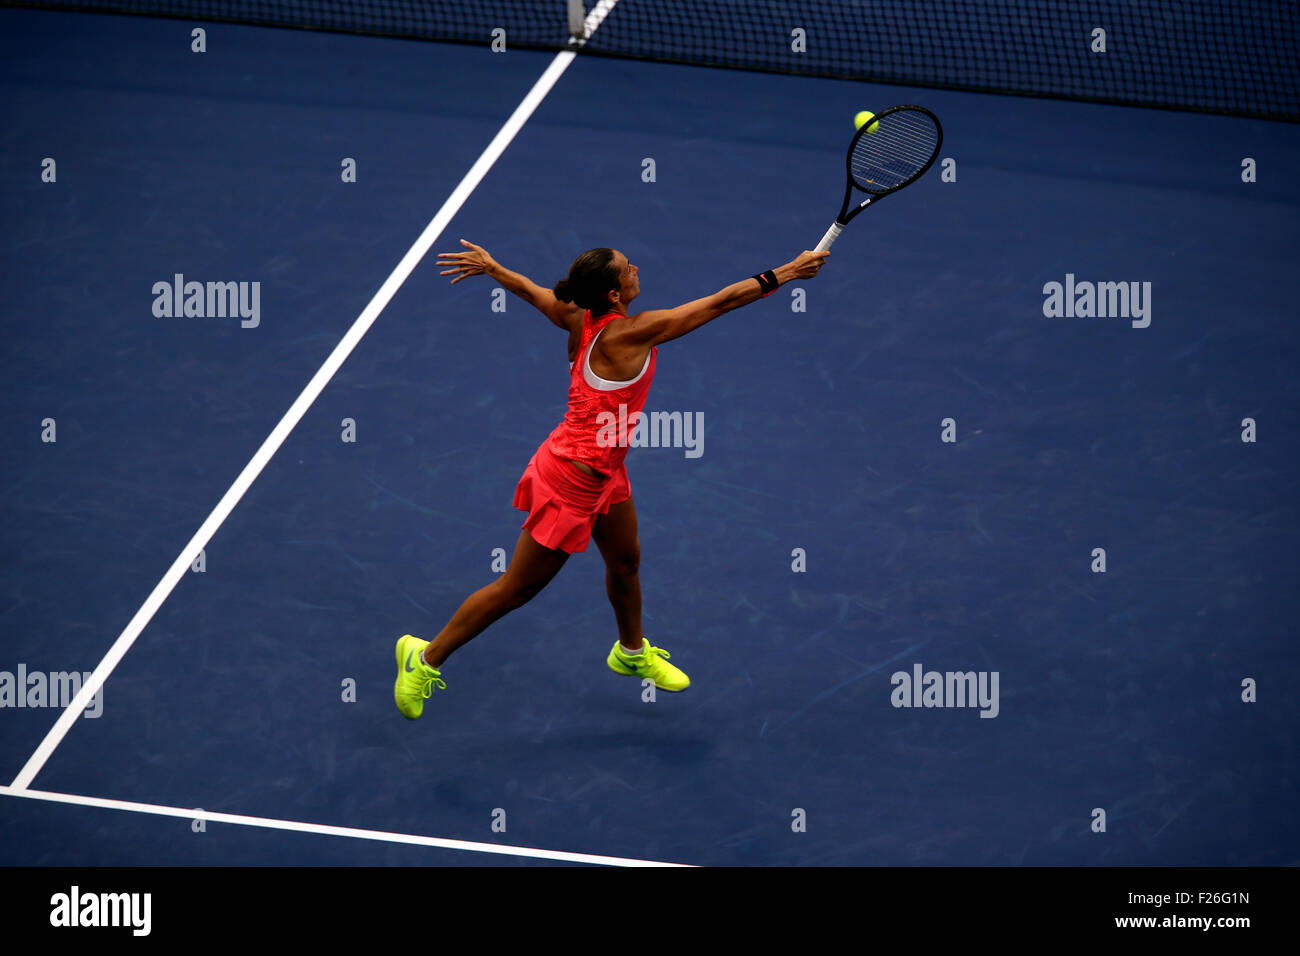 New York, USA. 12th Sep, 2015. Roberta Vinci of Italy reaches for a high volley to countrywoman Flavia Penetta during the women's final of the U.S. Open at Flushing Meadows, New York on the afternoon of September 12th, 2015.  Pennetta won the match 7-6 (7-4), 6-2 Credit:  Adam Stoltman/Alamy Live News Stock Photo